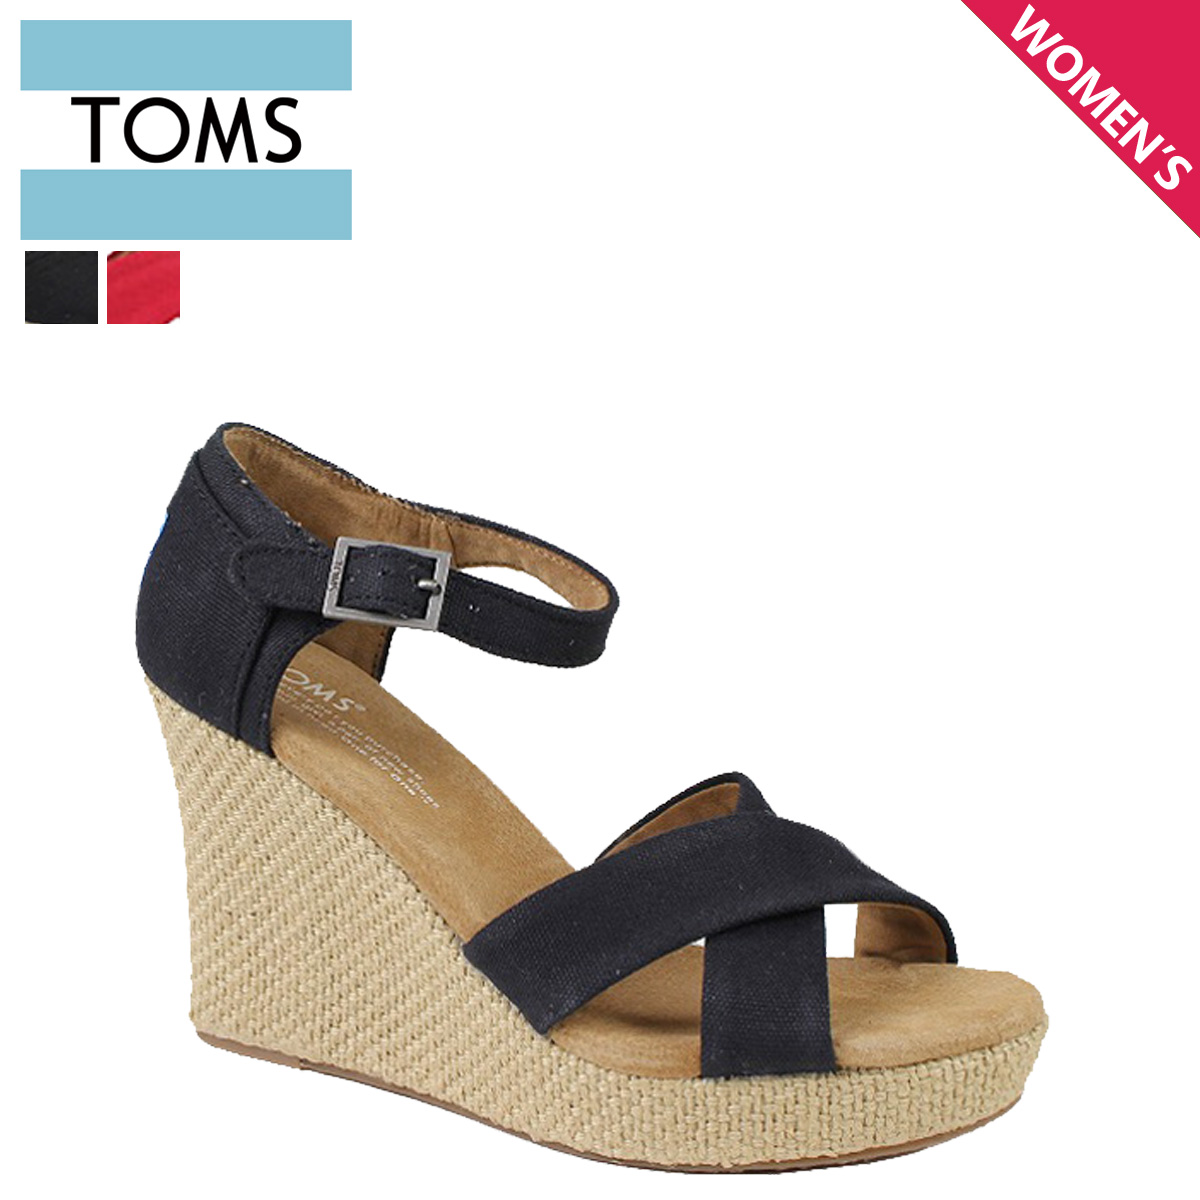 toms strappy wedge